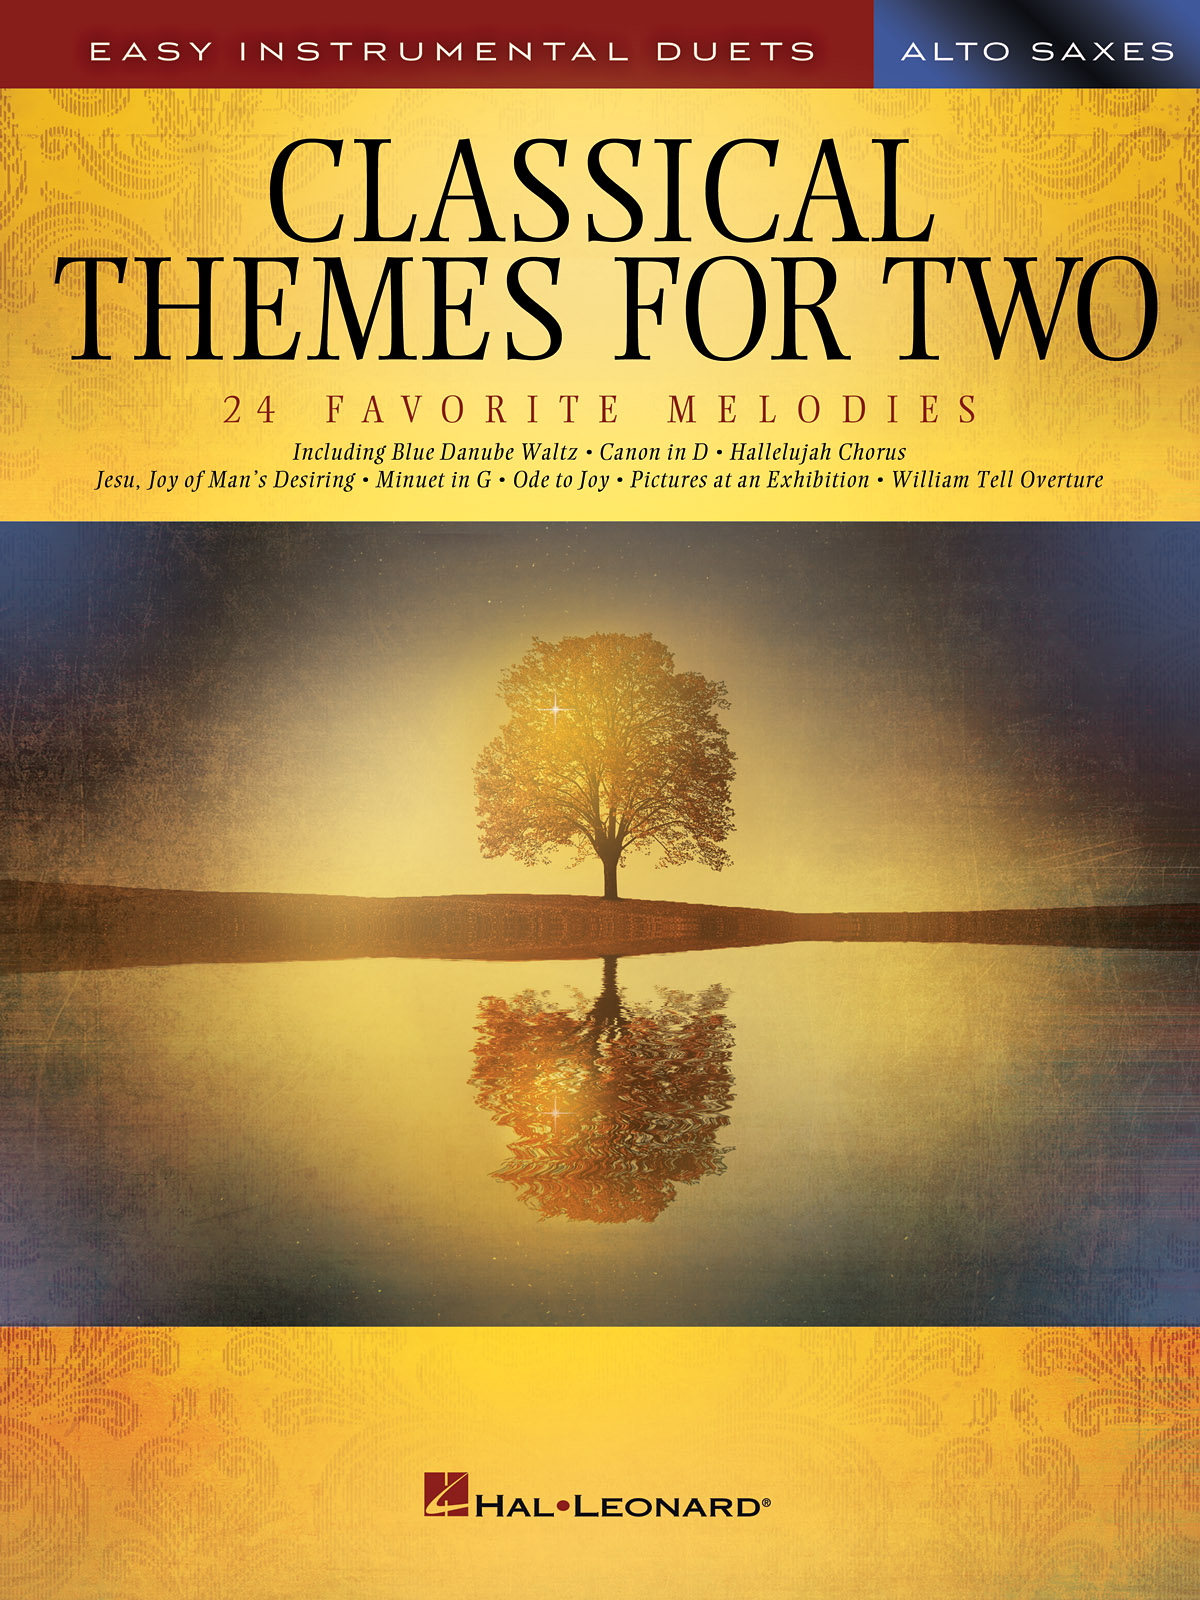 Classical Themes for Two pro Alto Saxophones - Easy Instrumental Duets